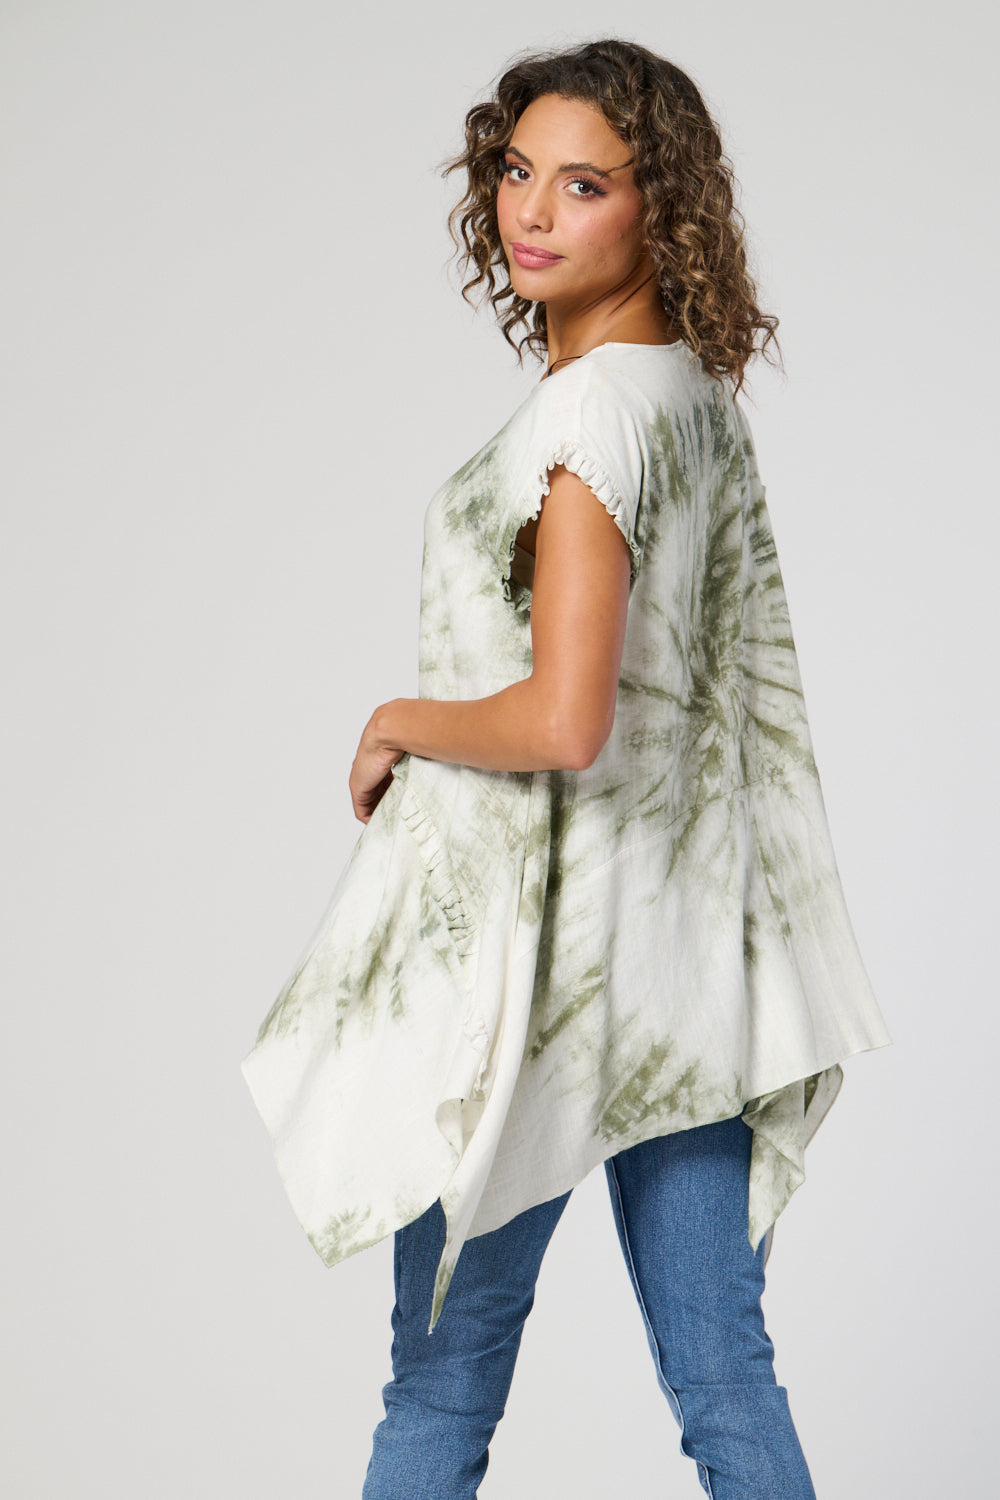 7370-A Tie dye, dip side seam Tunic (Wholesale Pack Of 7) Pre-Order